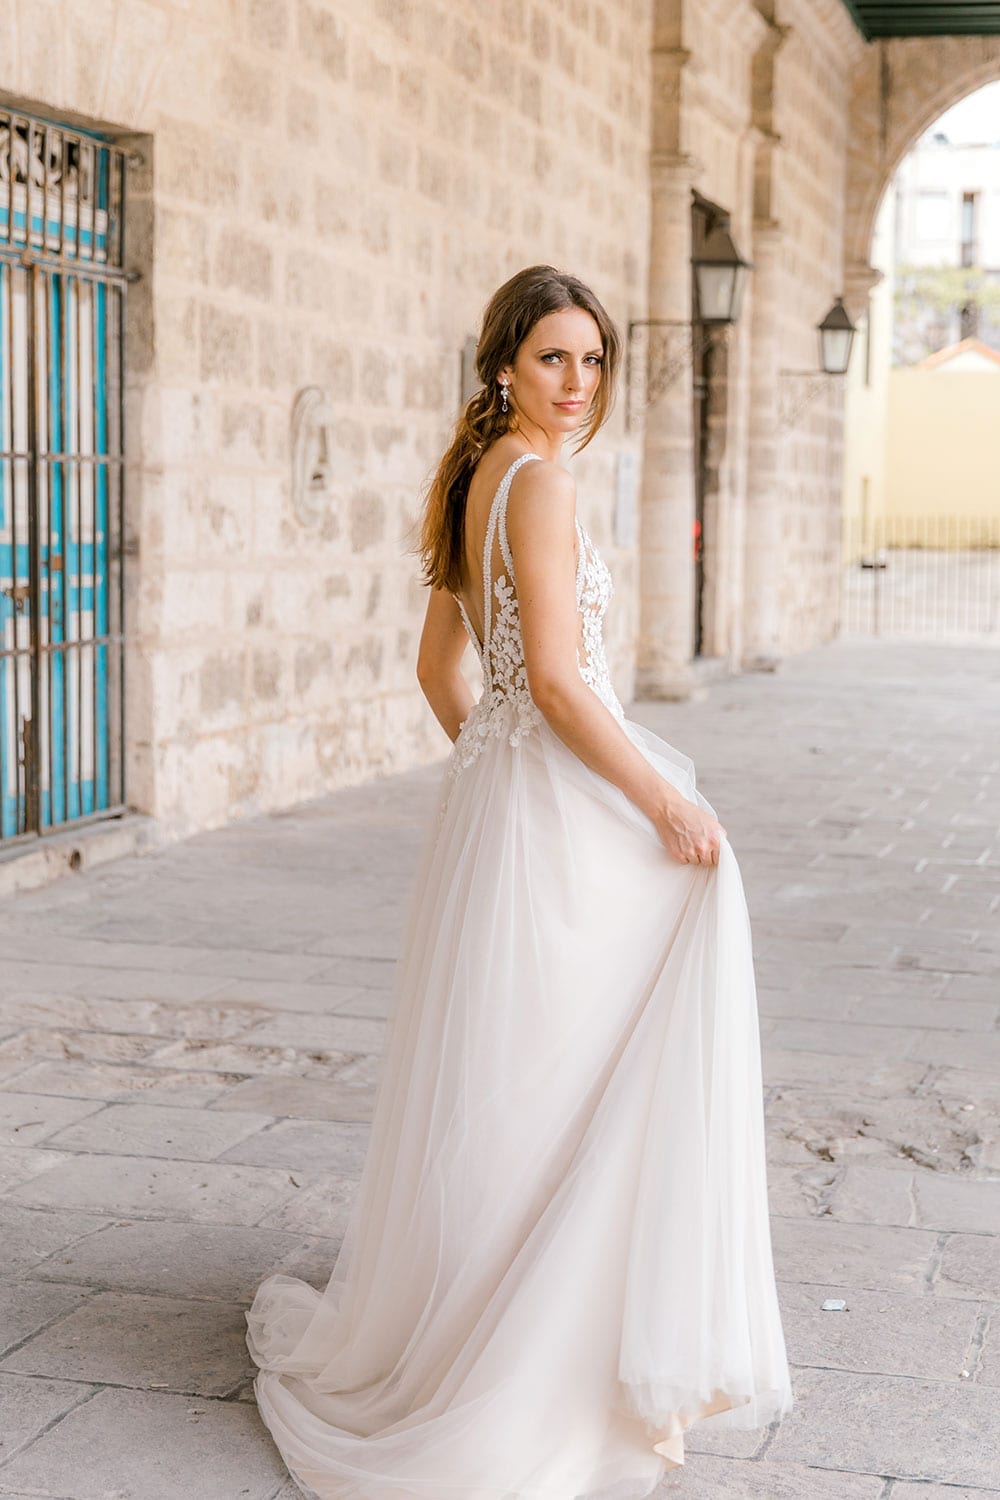 Model wearing Vinka Design Isabel Wedding Dress, a Champagne coloured Tulle Gown with Sheer V-Neck Bodice and Beaded Lace in the archway of an old building in Havana facing away